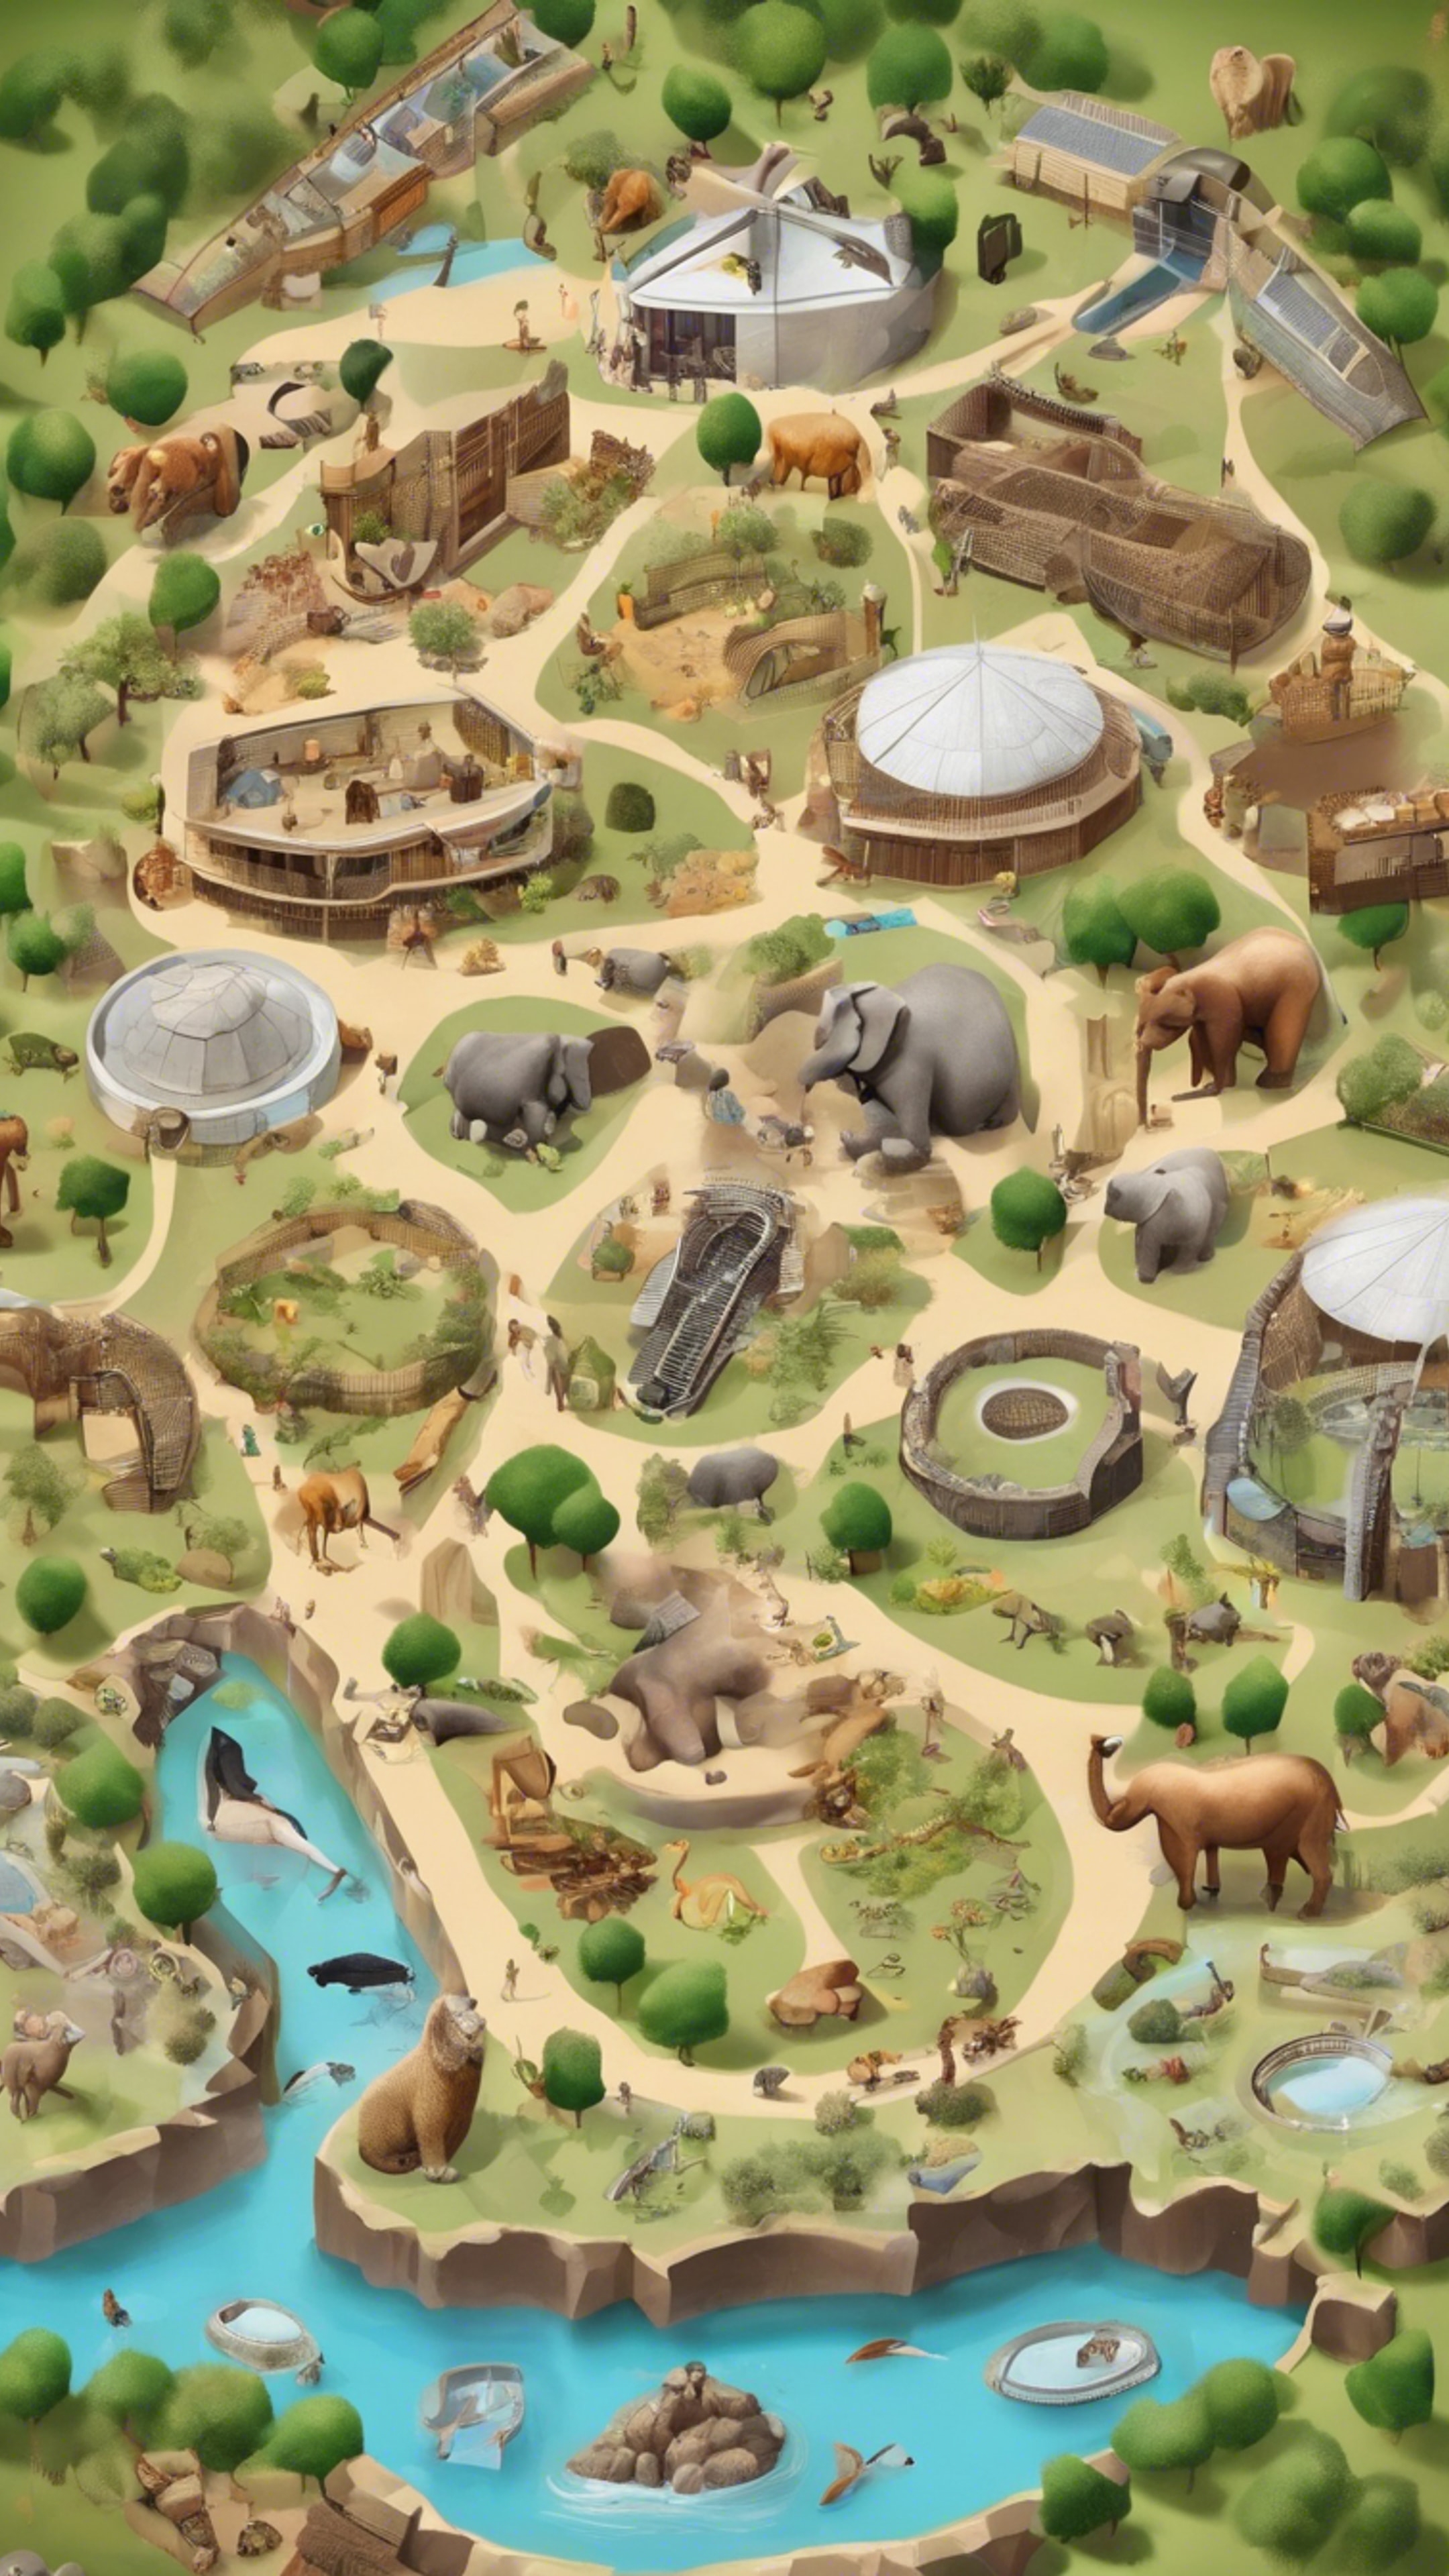 A graphic map of a zoo, with different animal enclosures, food stalls and amenities. Papel de parede[7d3ed7eed3f244f7a17f]